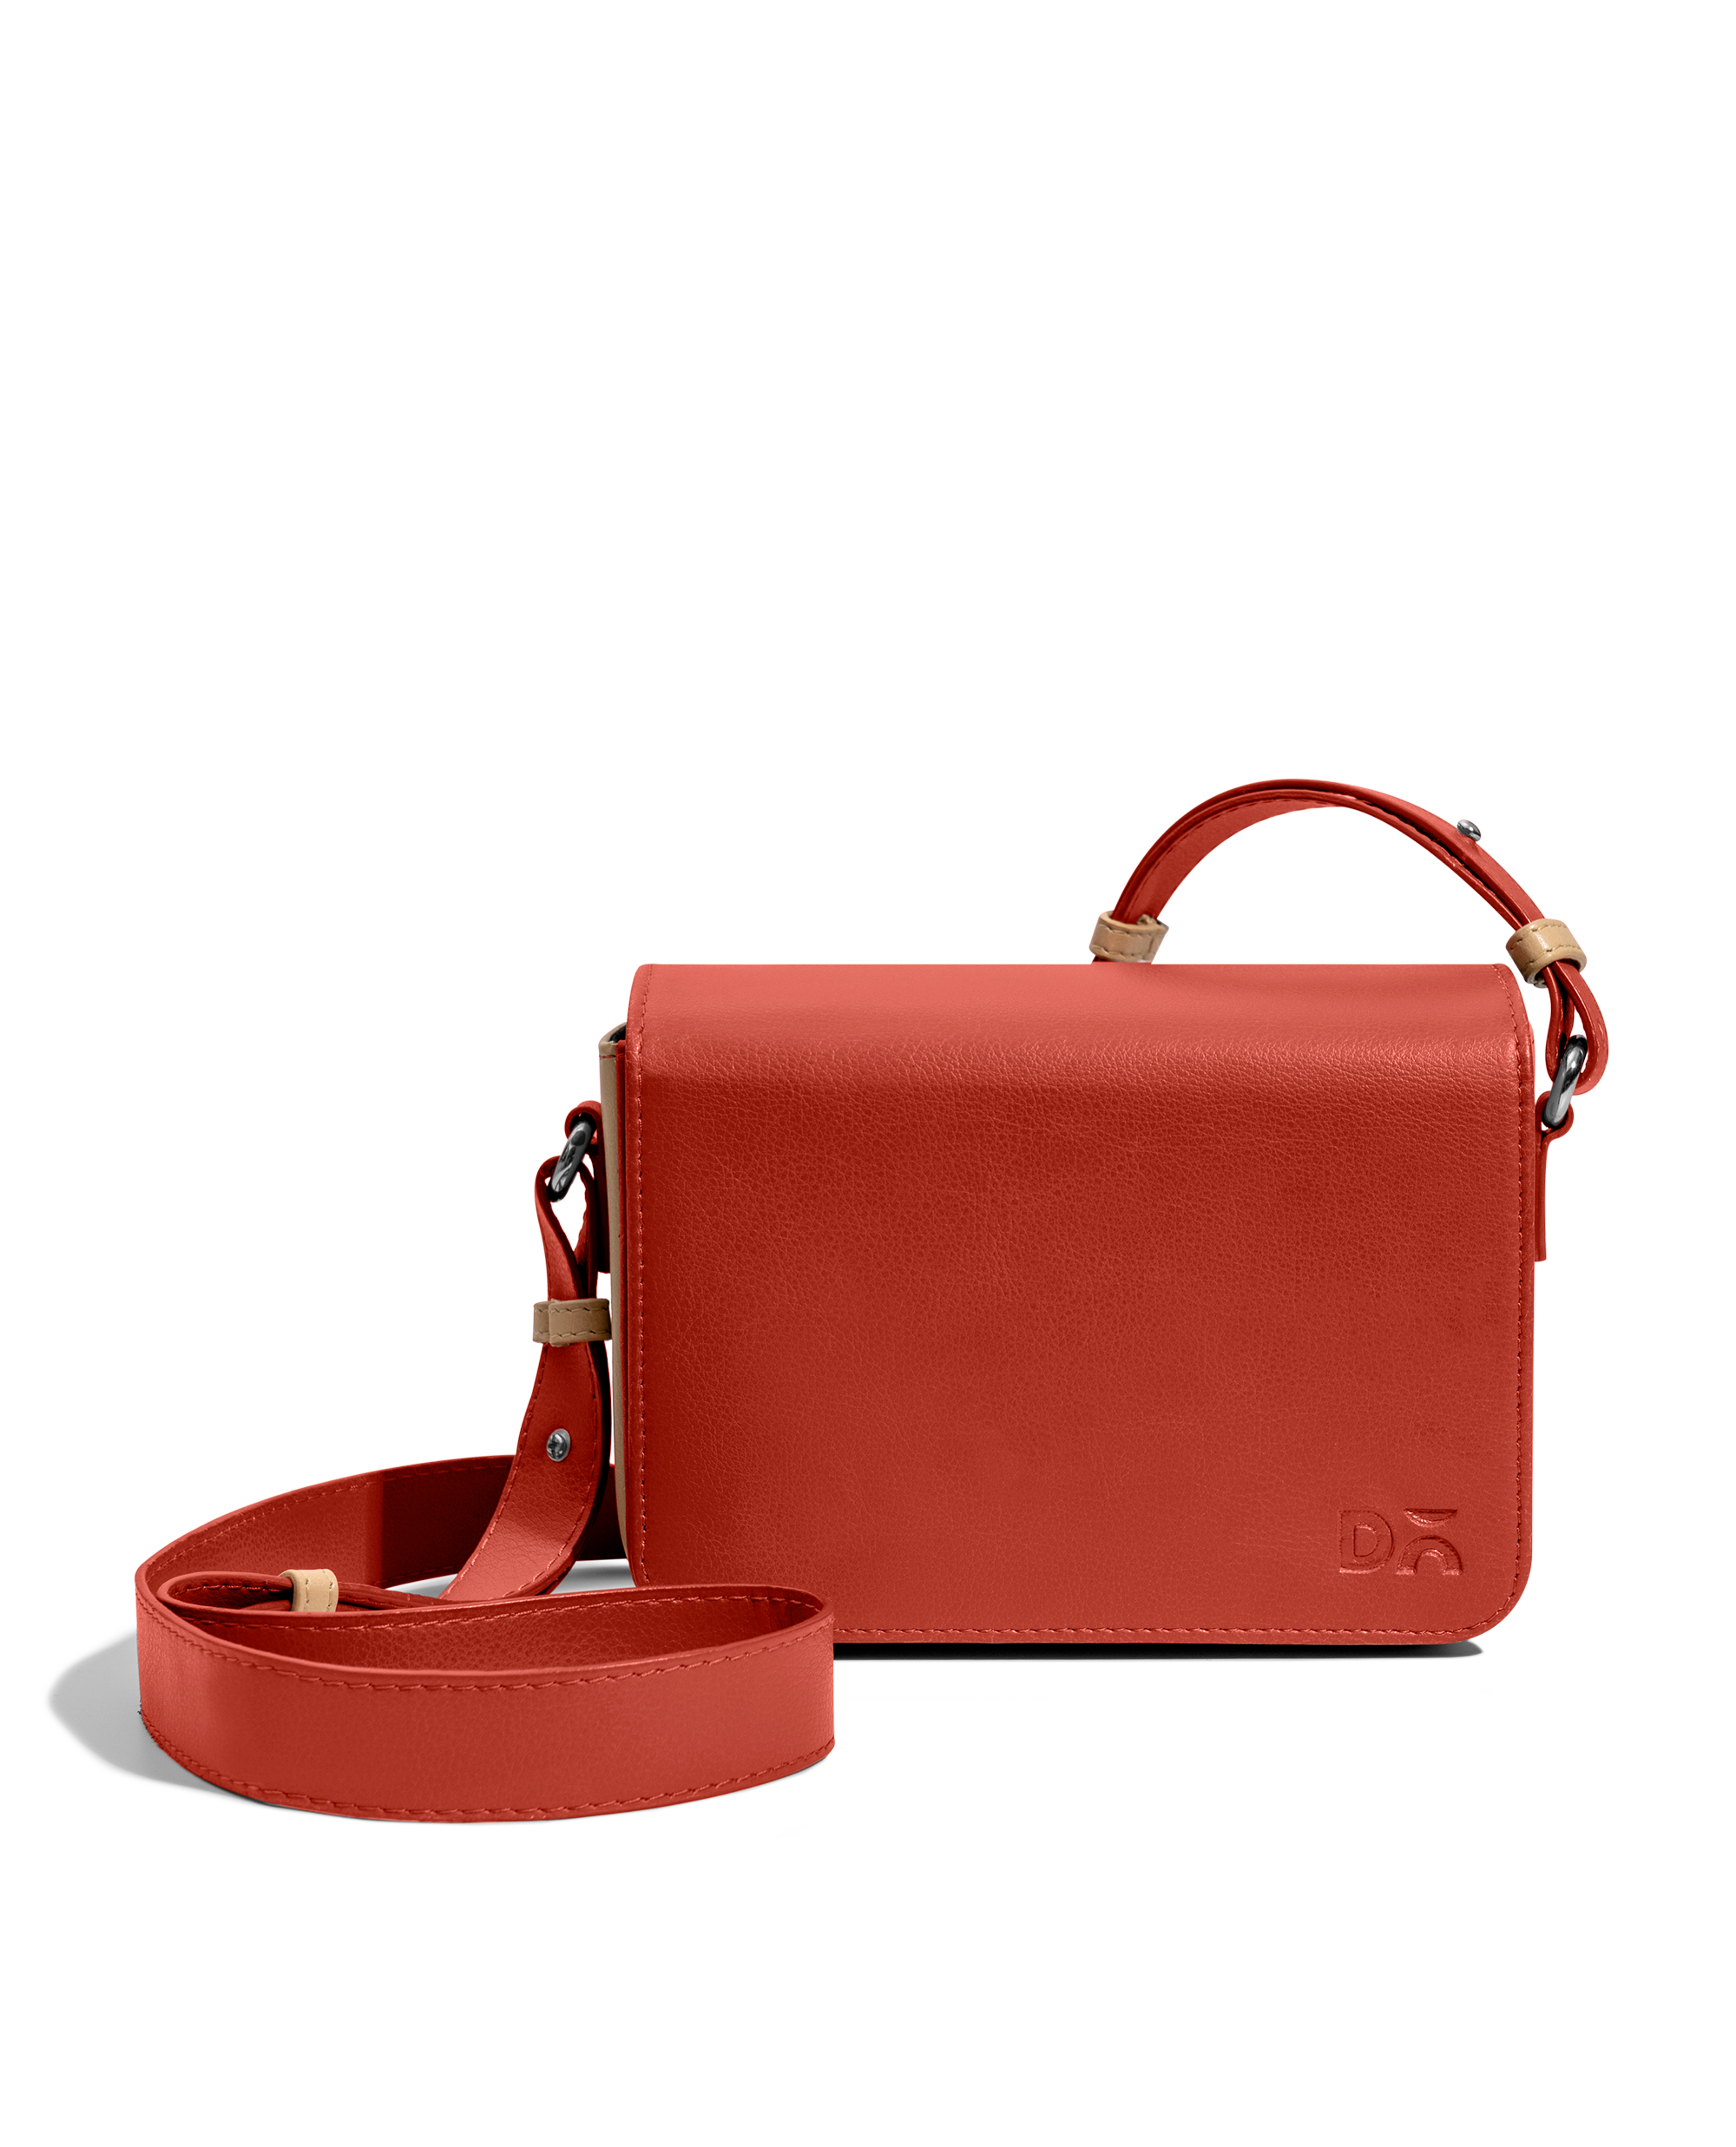 The Sak Red Leather Cross Body Purse. | Leather crossbody purse, Crossbody, Red  leather